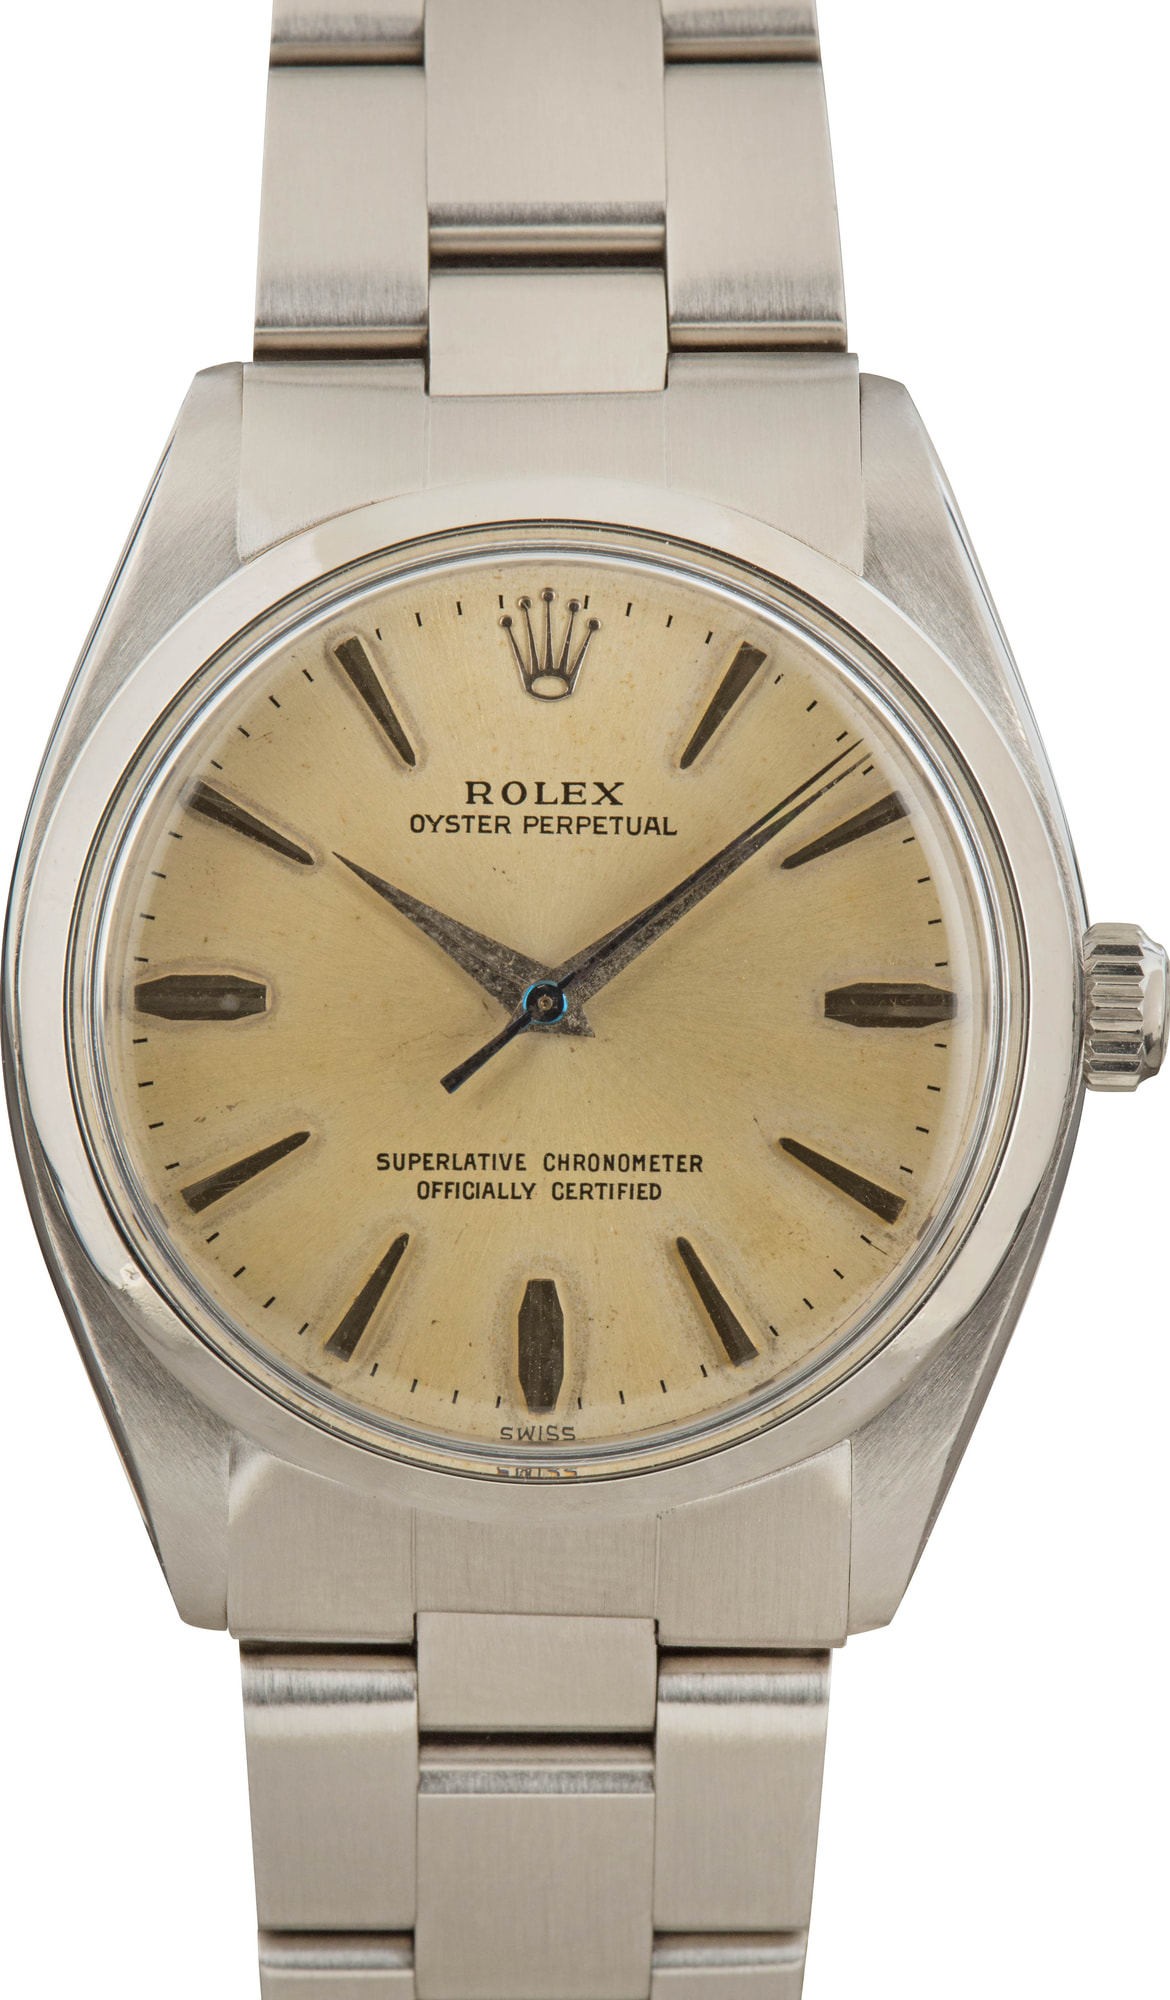 Buy Used Rolex Oyster Perpetual 1002 | Bob's Watches - Sku: 164065